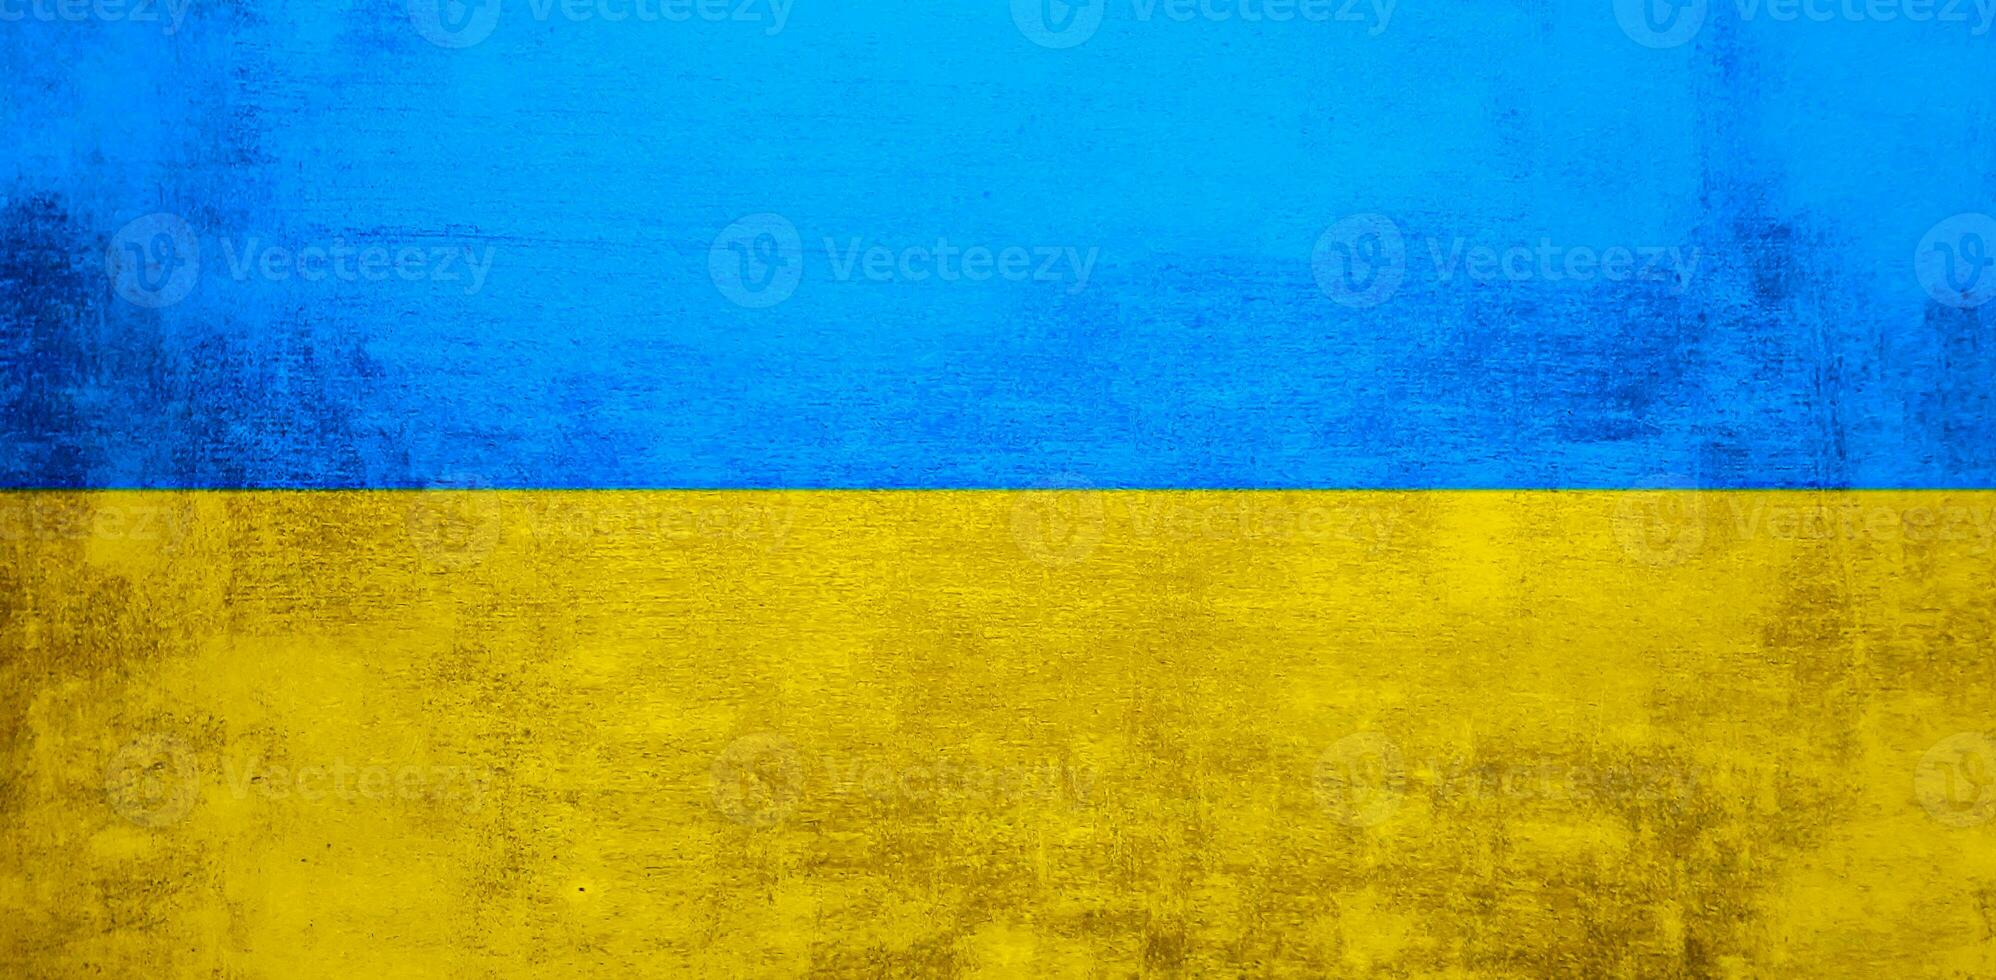 The wall is in the colors of the Ukrainian national flag - blue and yellow. Abstract texture background of concrete stone wall. Ukrainian flag on a grunge wall in connection with the war with Russia. photo